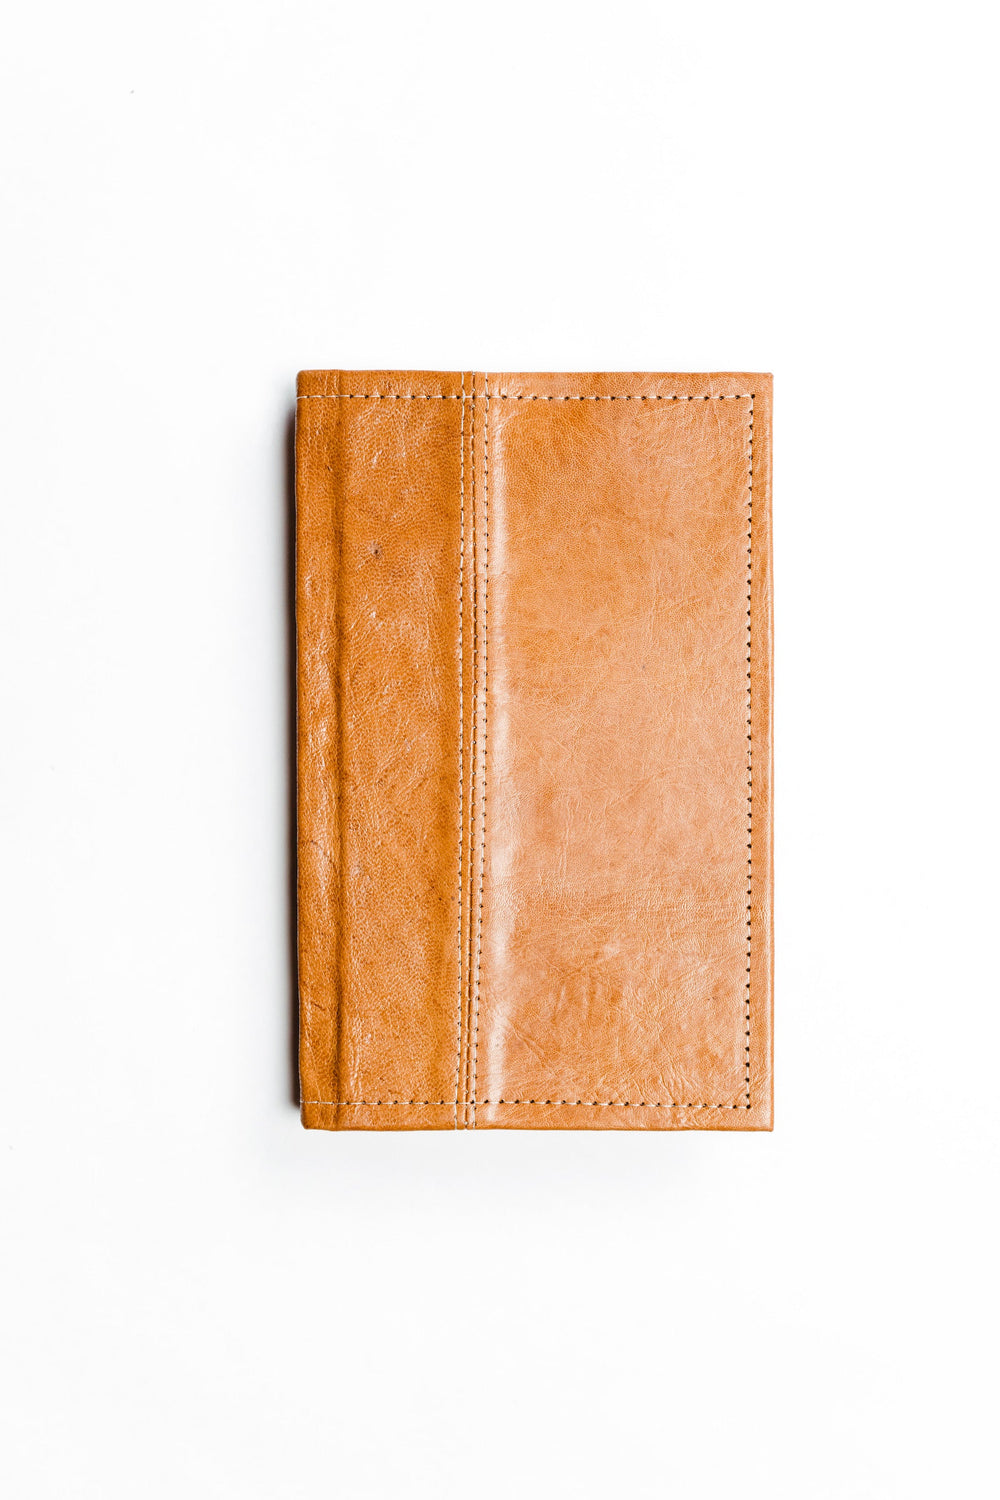 Pastiche Leather Journal by 2nd Story Goods